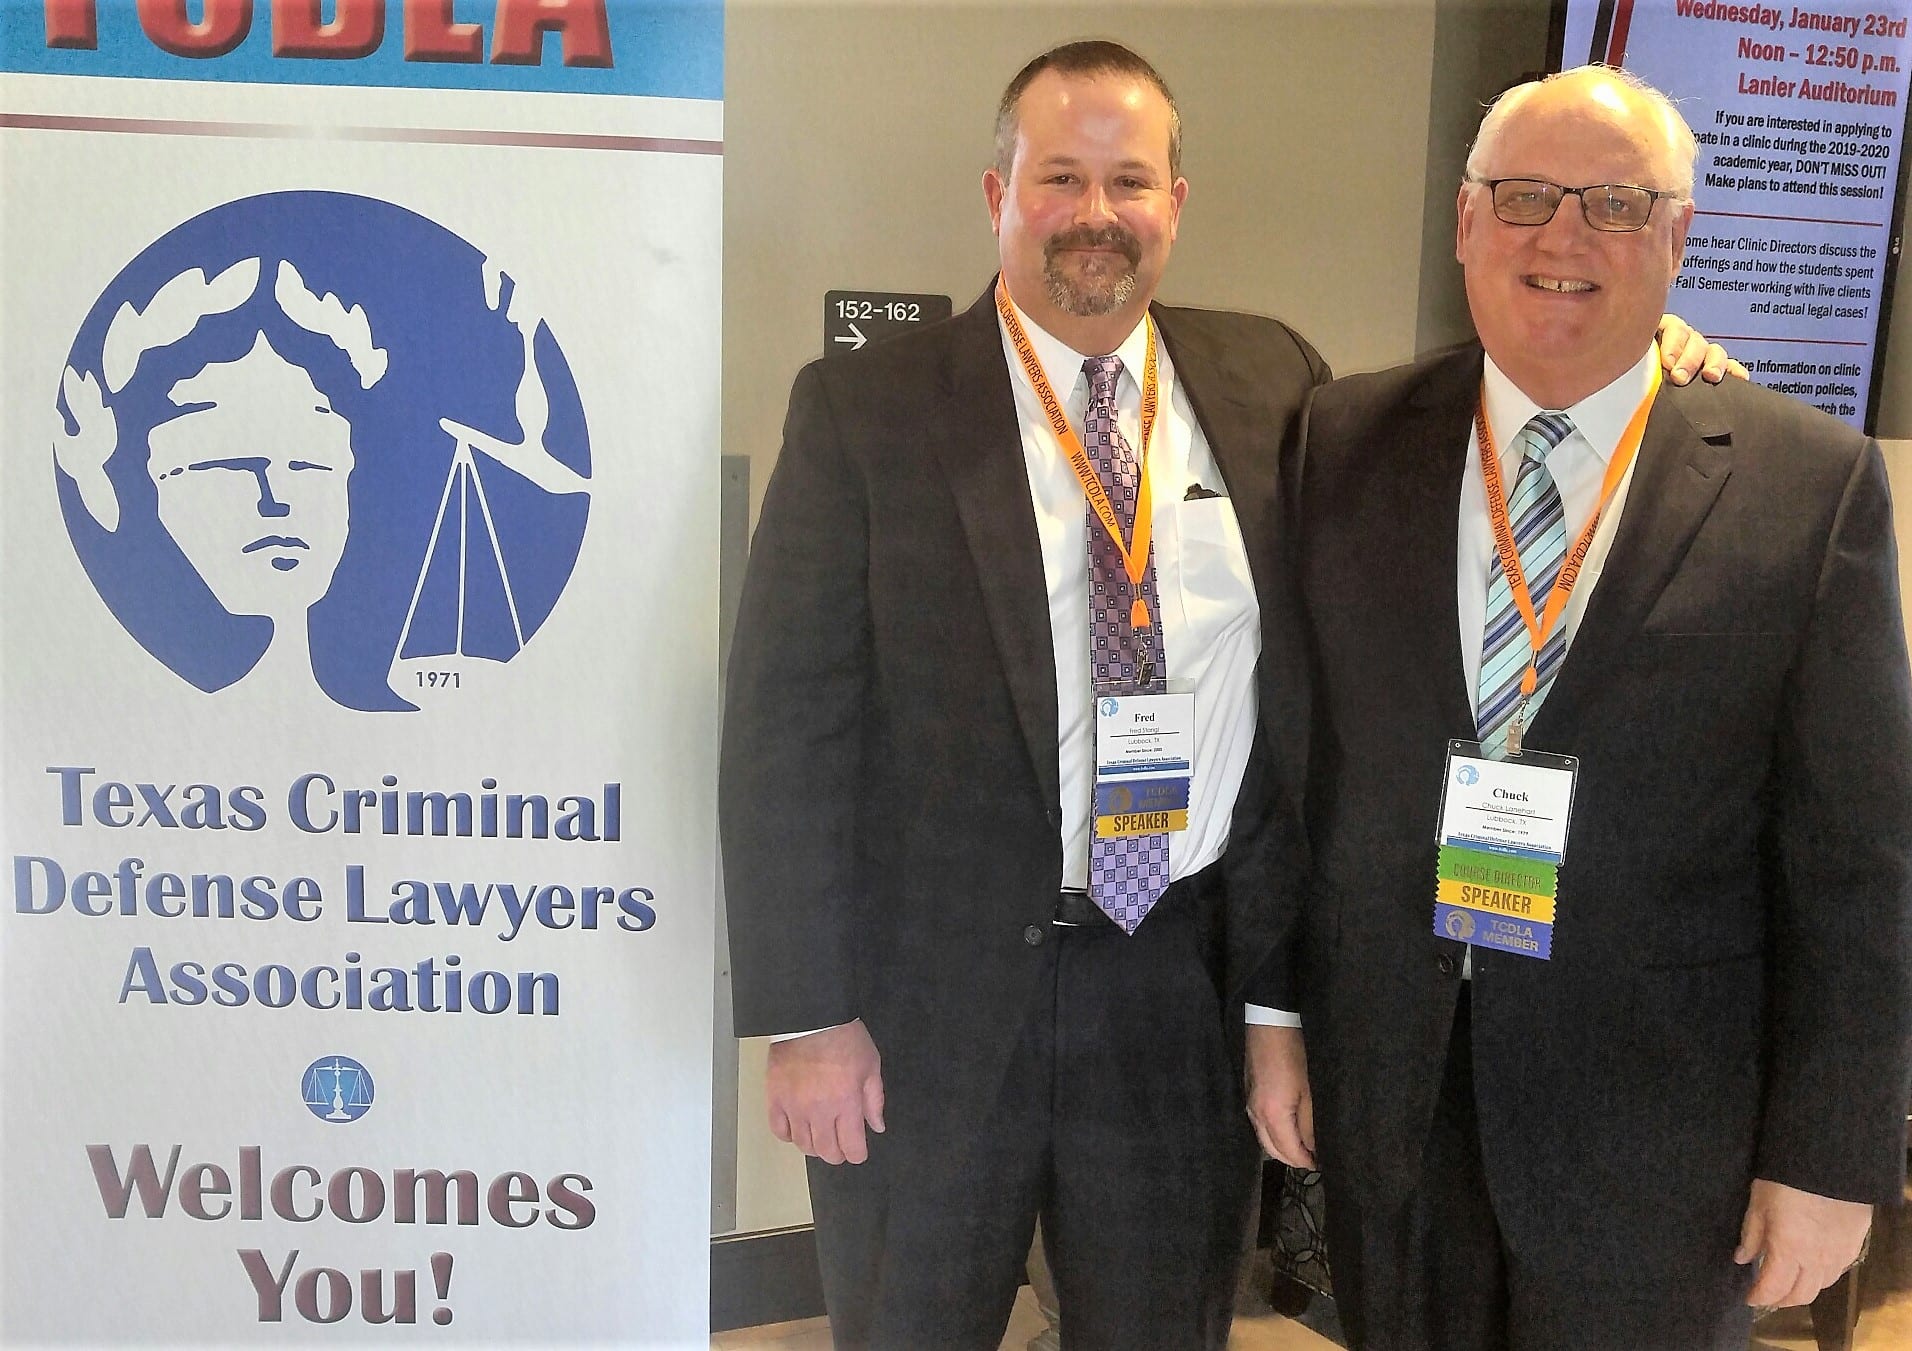 Chuck Lanehart and Fred Stangl standing together at Law Seminar